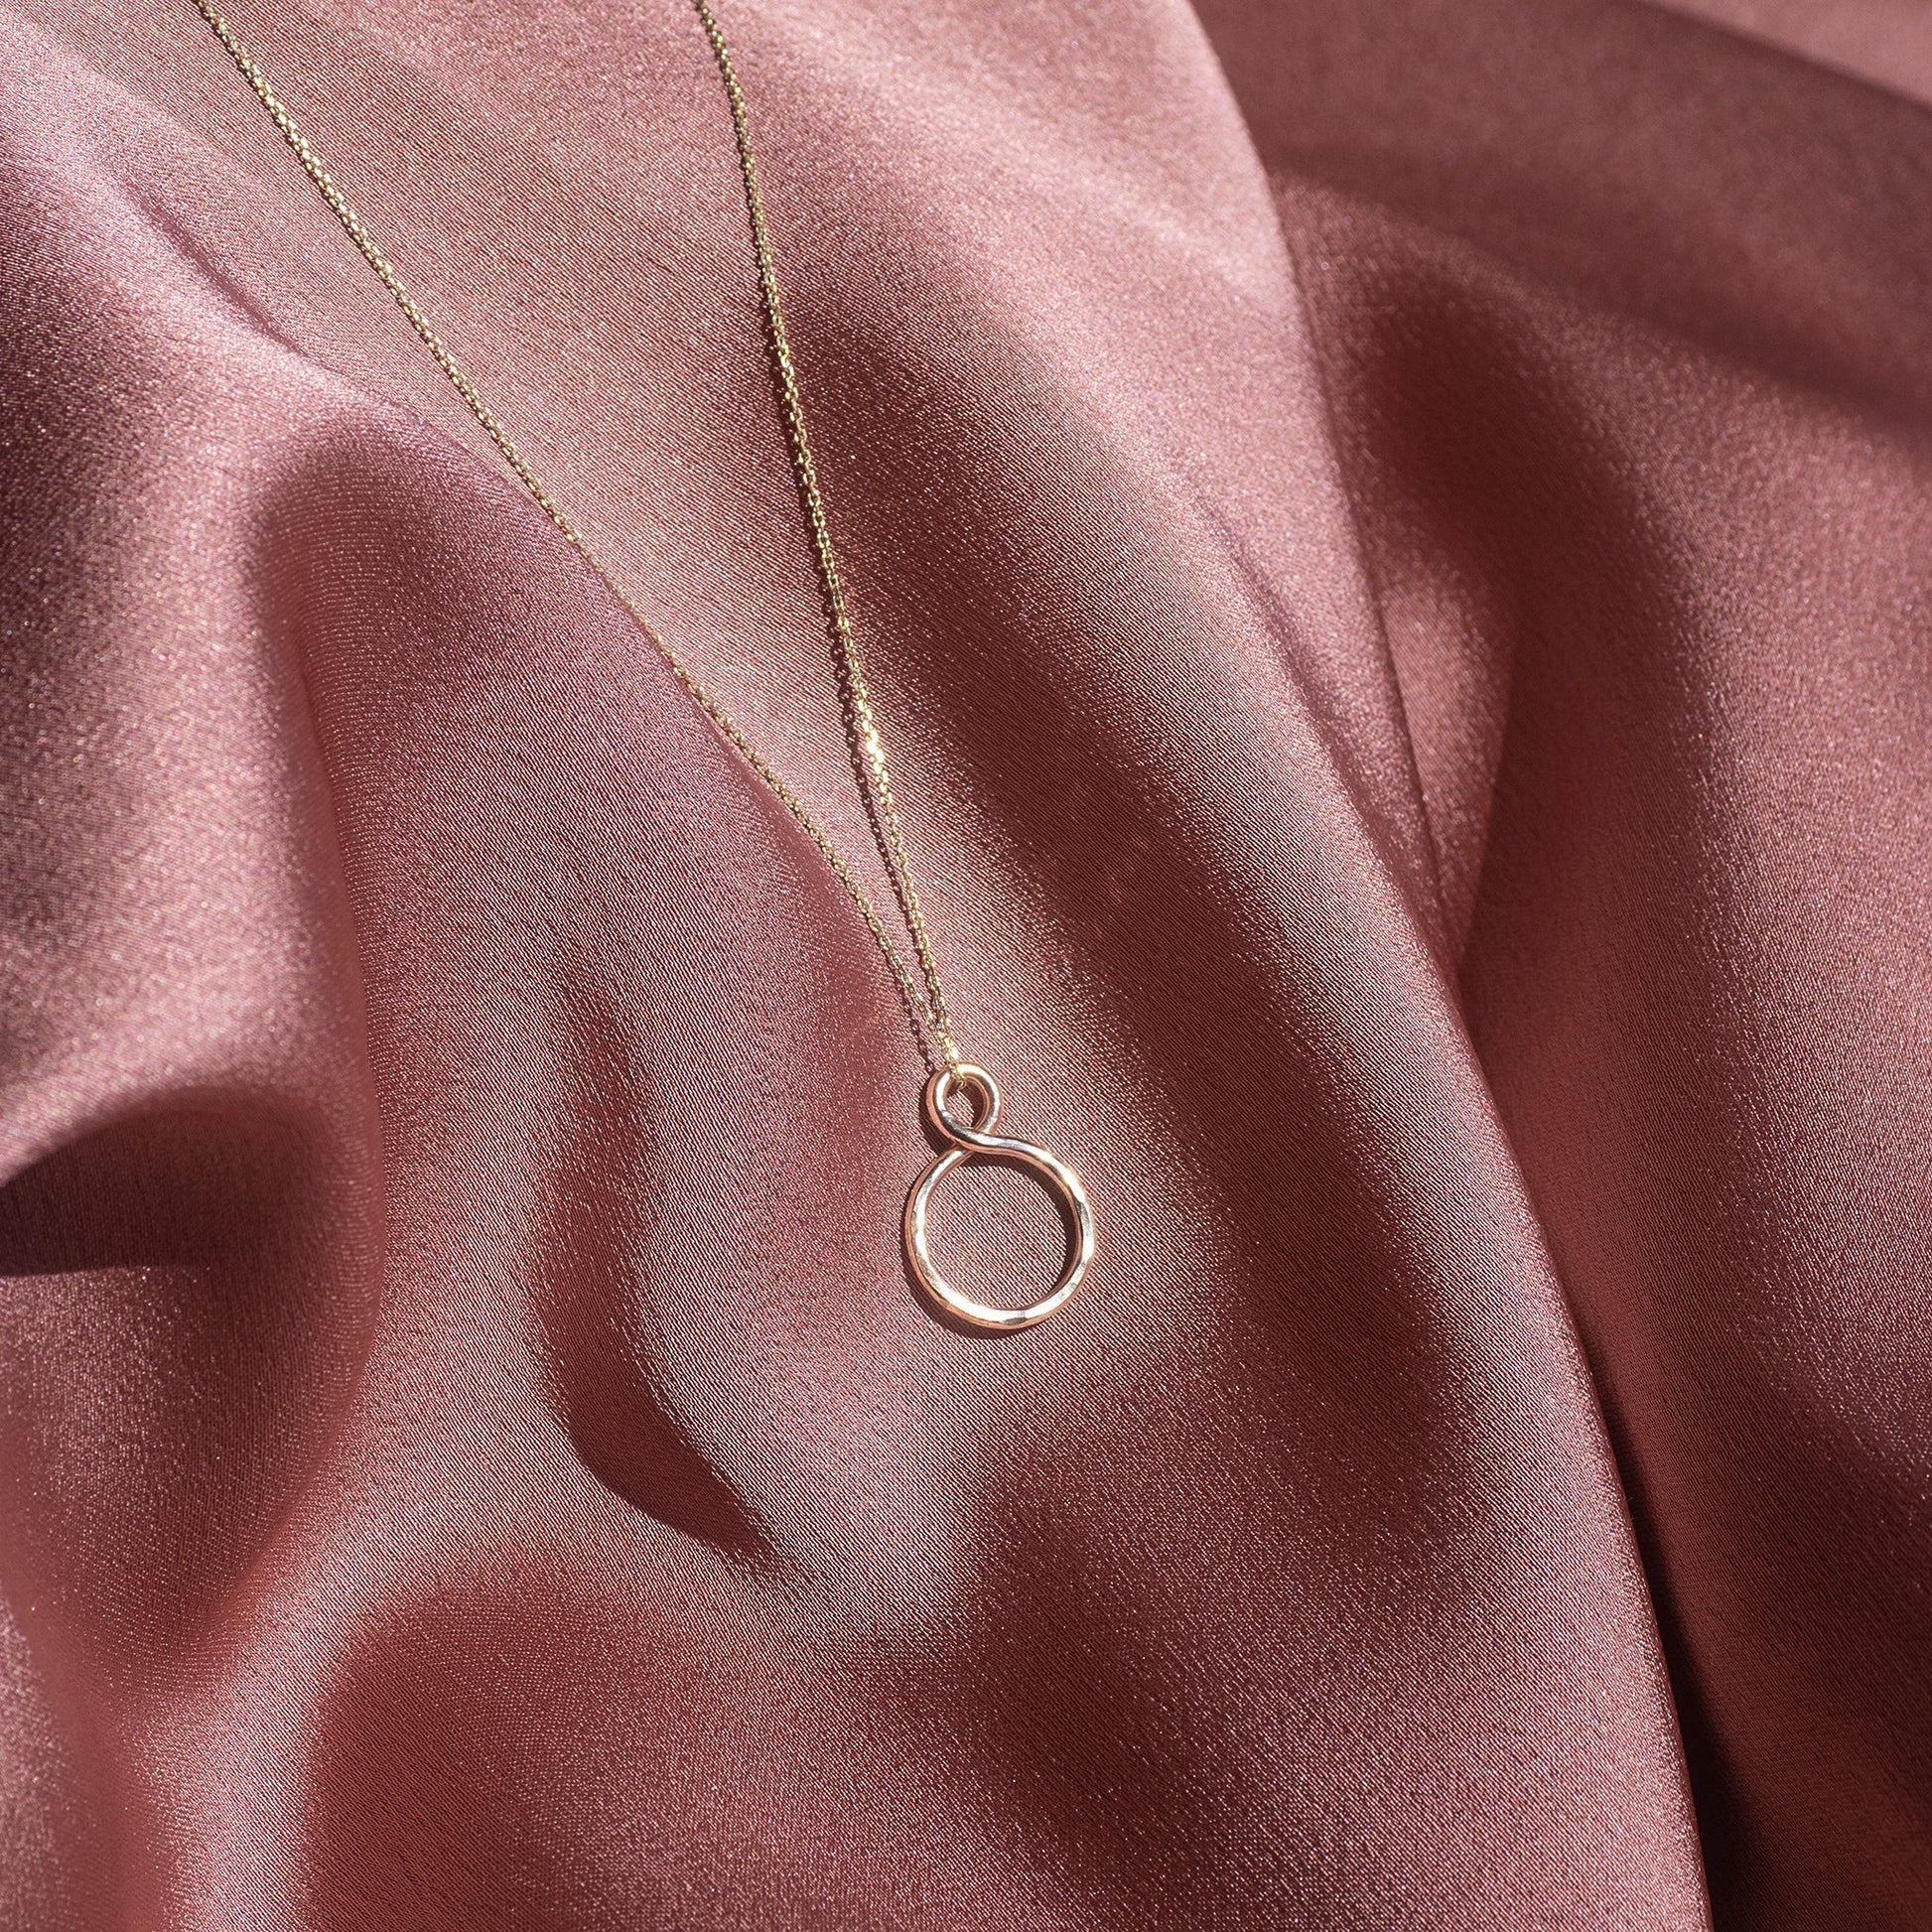 21st Birthday Gift - Petite Infinity Necklace - 9kt Gold